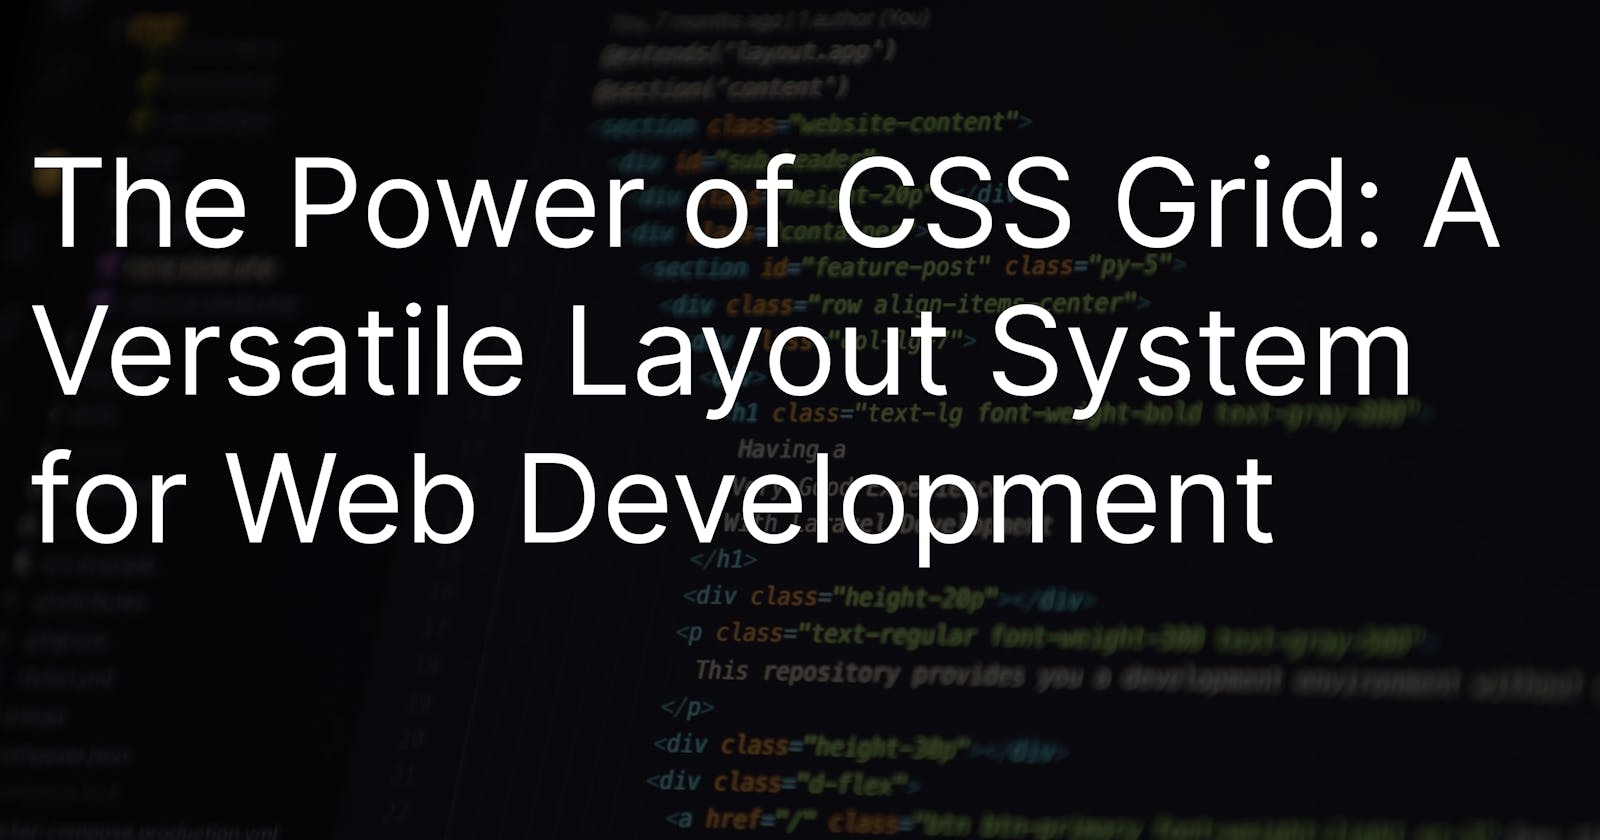 The Power of CSS Grid: A Versatile Layout System for Web Development